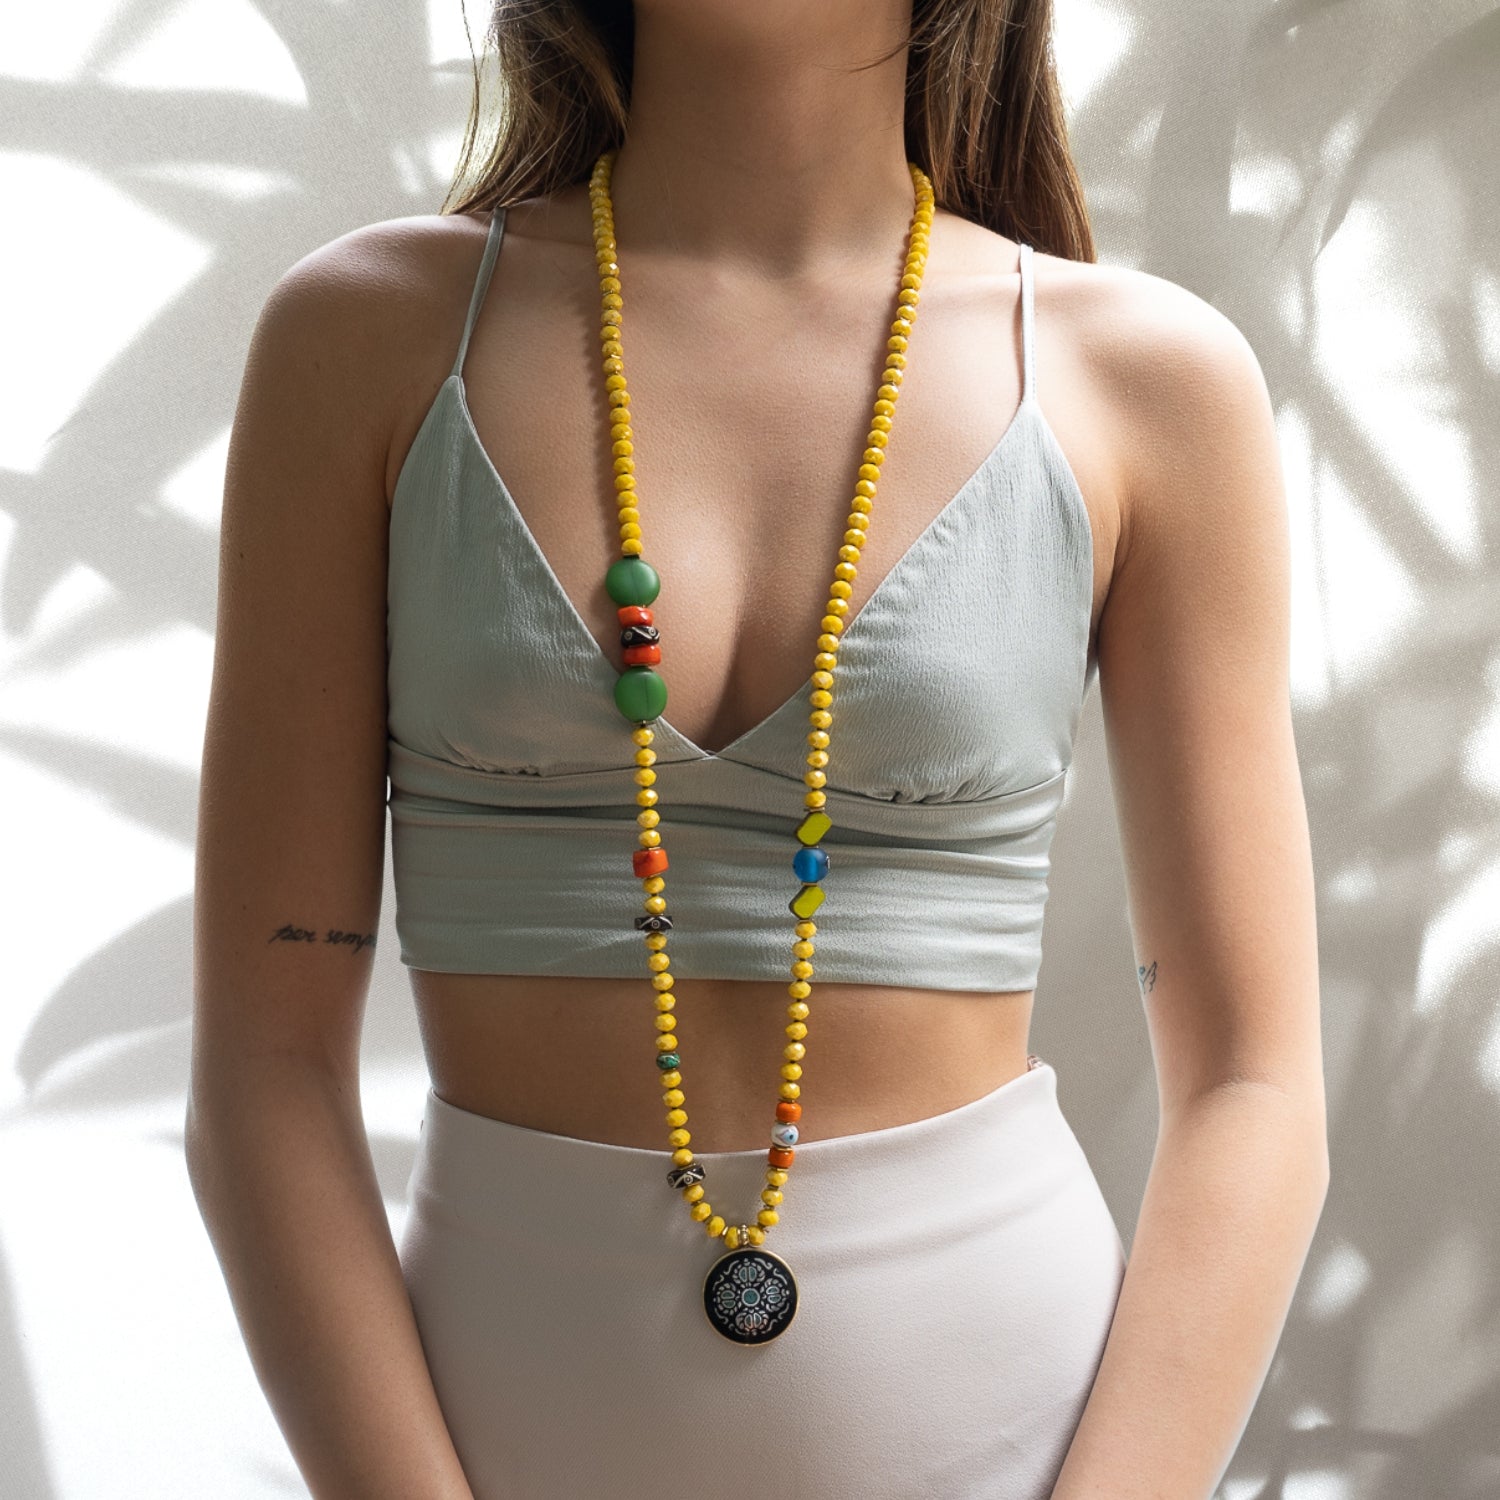 Model showcasing the vibrant and spiritual Yoga Serenity Necklace with grace and confidence.